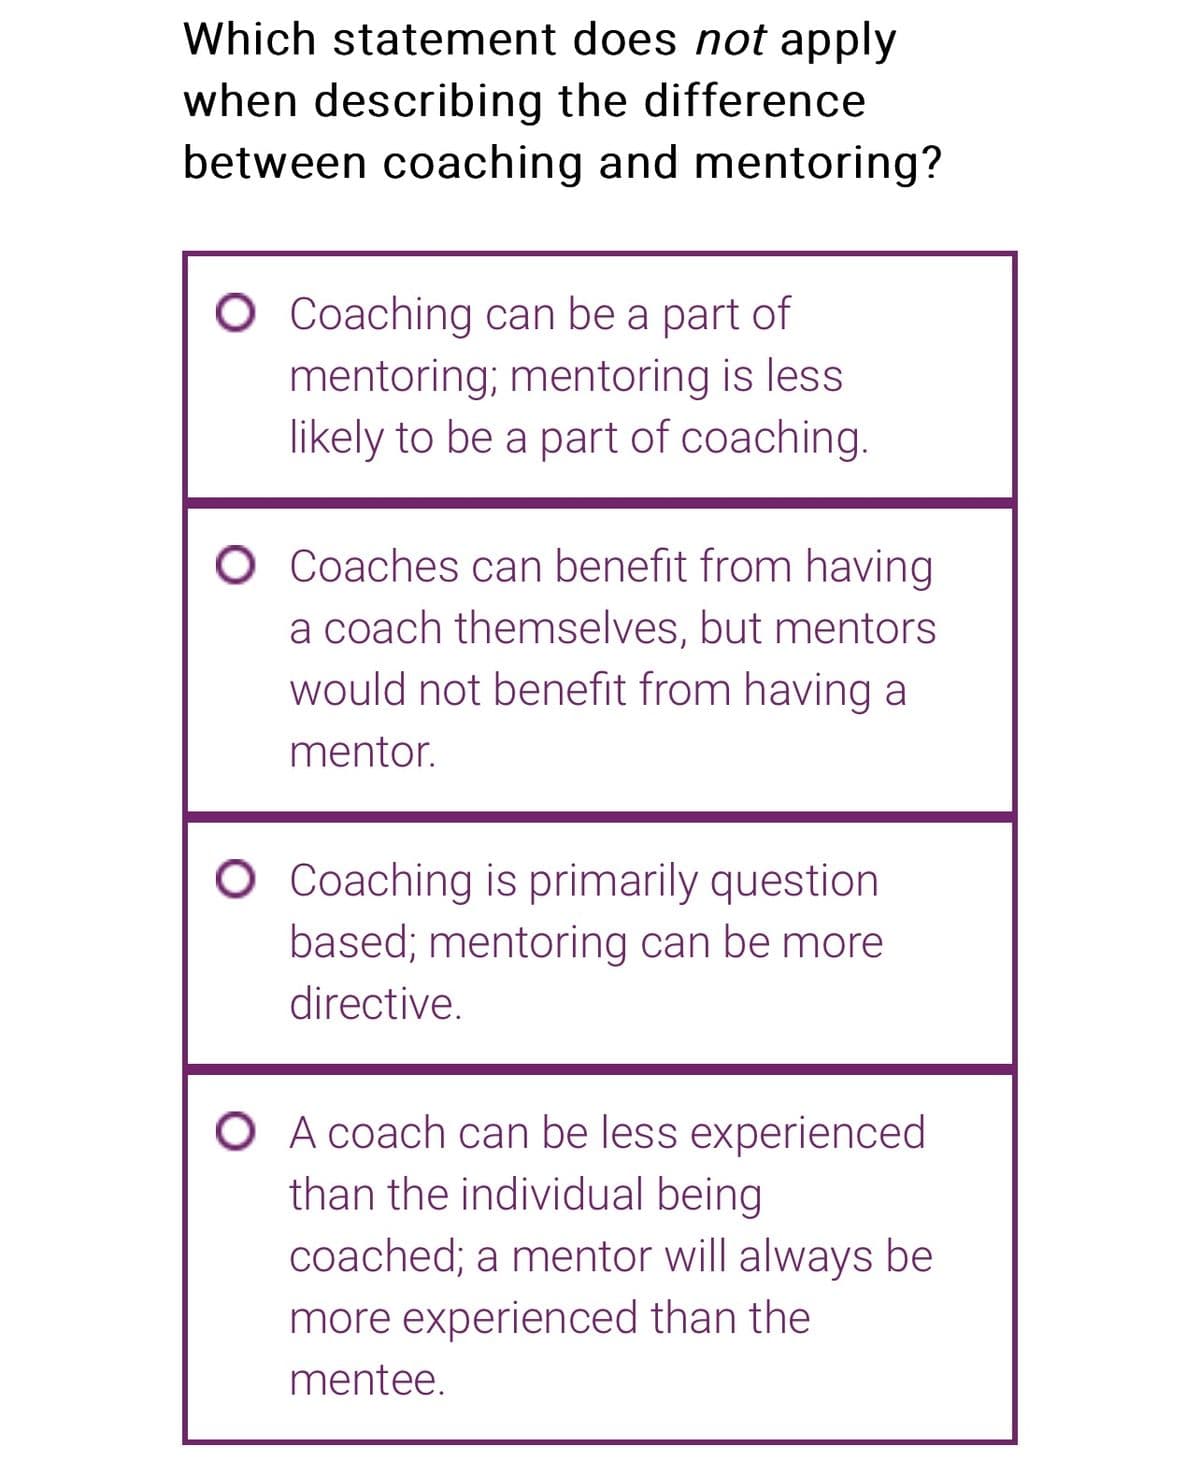 Which statement does not apply
when describing the difference
between coaching and mentoring?
O Coaching can be a part of
mentoring; mentoring is less
likely to be a part of coaching.
Coaches can benefit from having
a coach themselves, but mentors
would not benefit from having a
mentor.
Coaching is primarily question
based; mentoring can be more
directive.
O A coach can be less experienced
than the individual being
coached; a mentor will always be
more experienced than the
mentee.